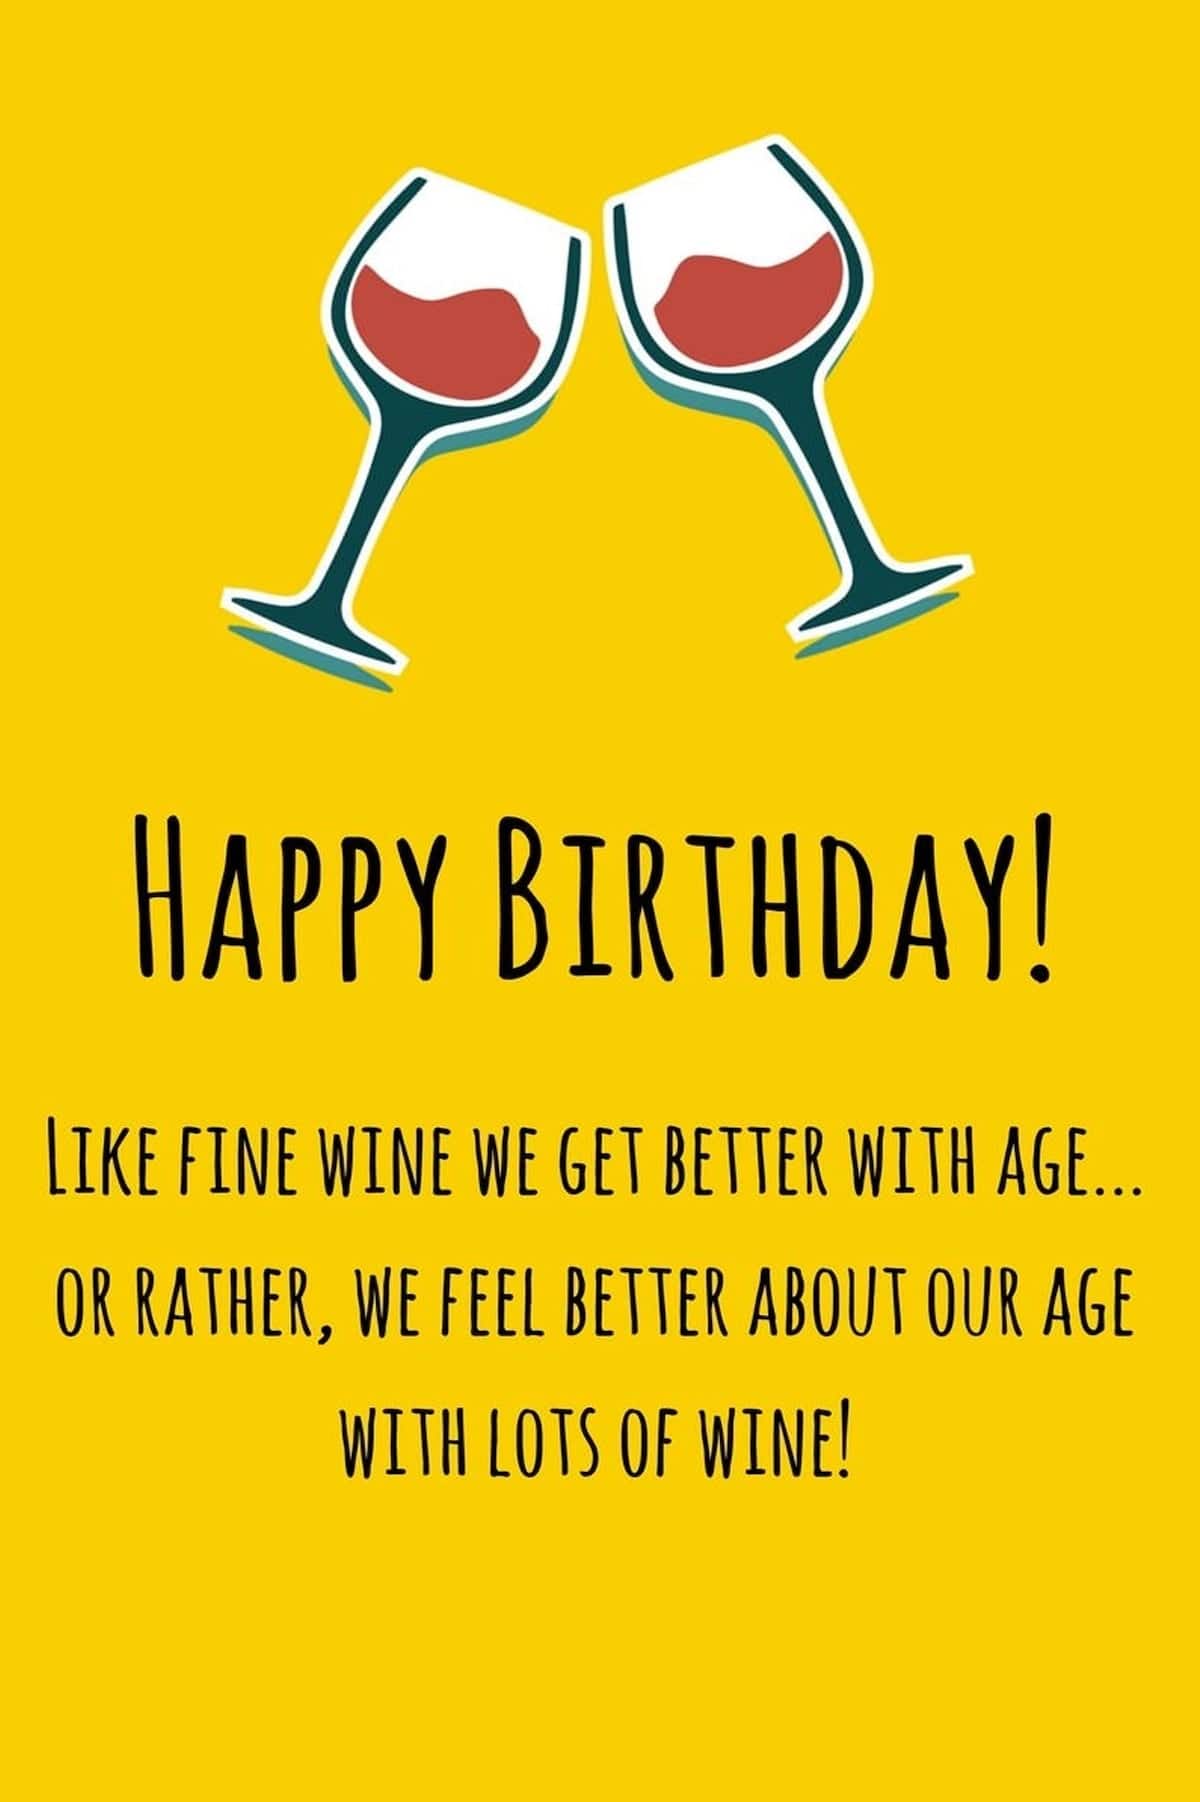 Funny Birthday Quotes For Friends The Cake Boutique